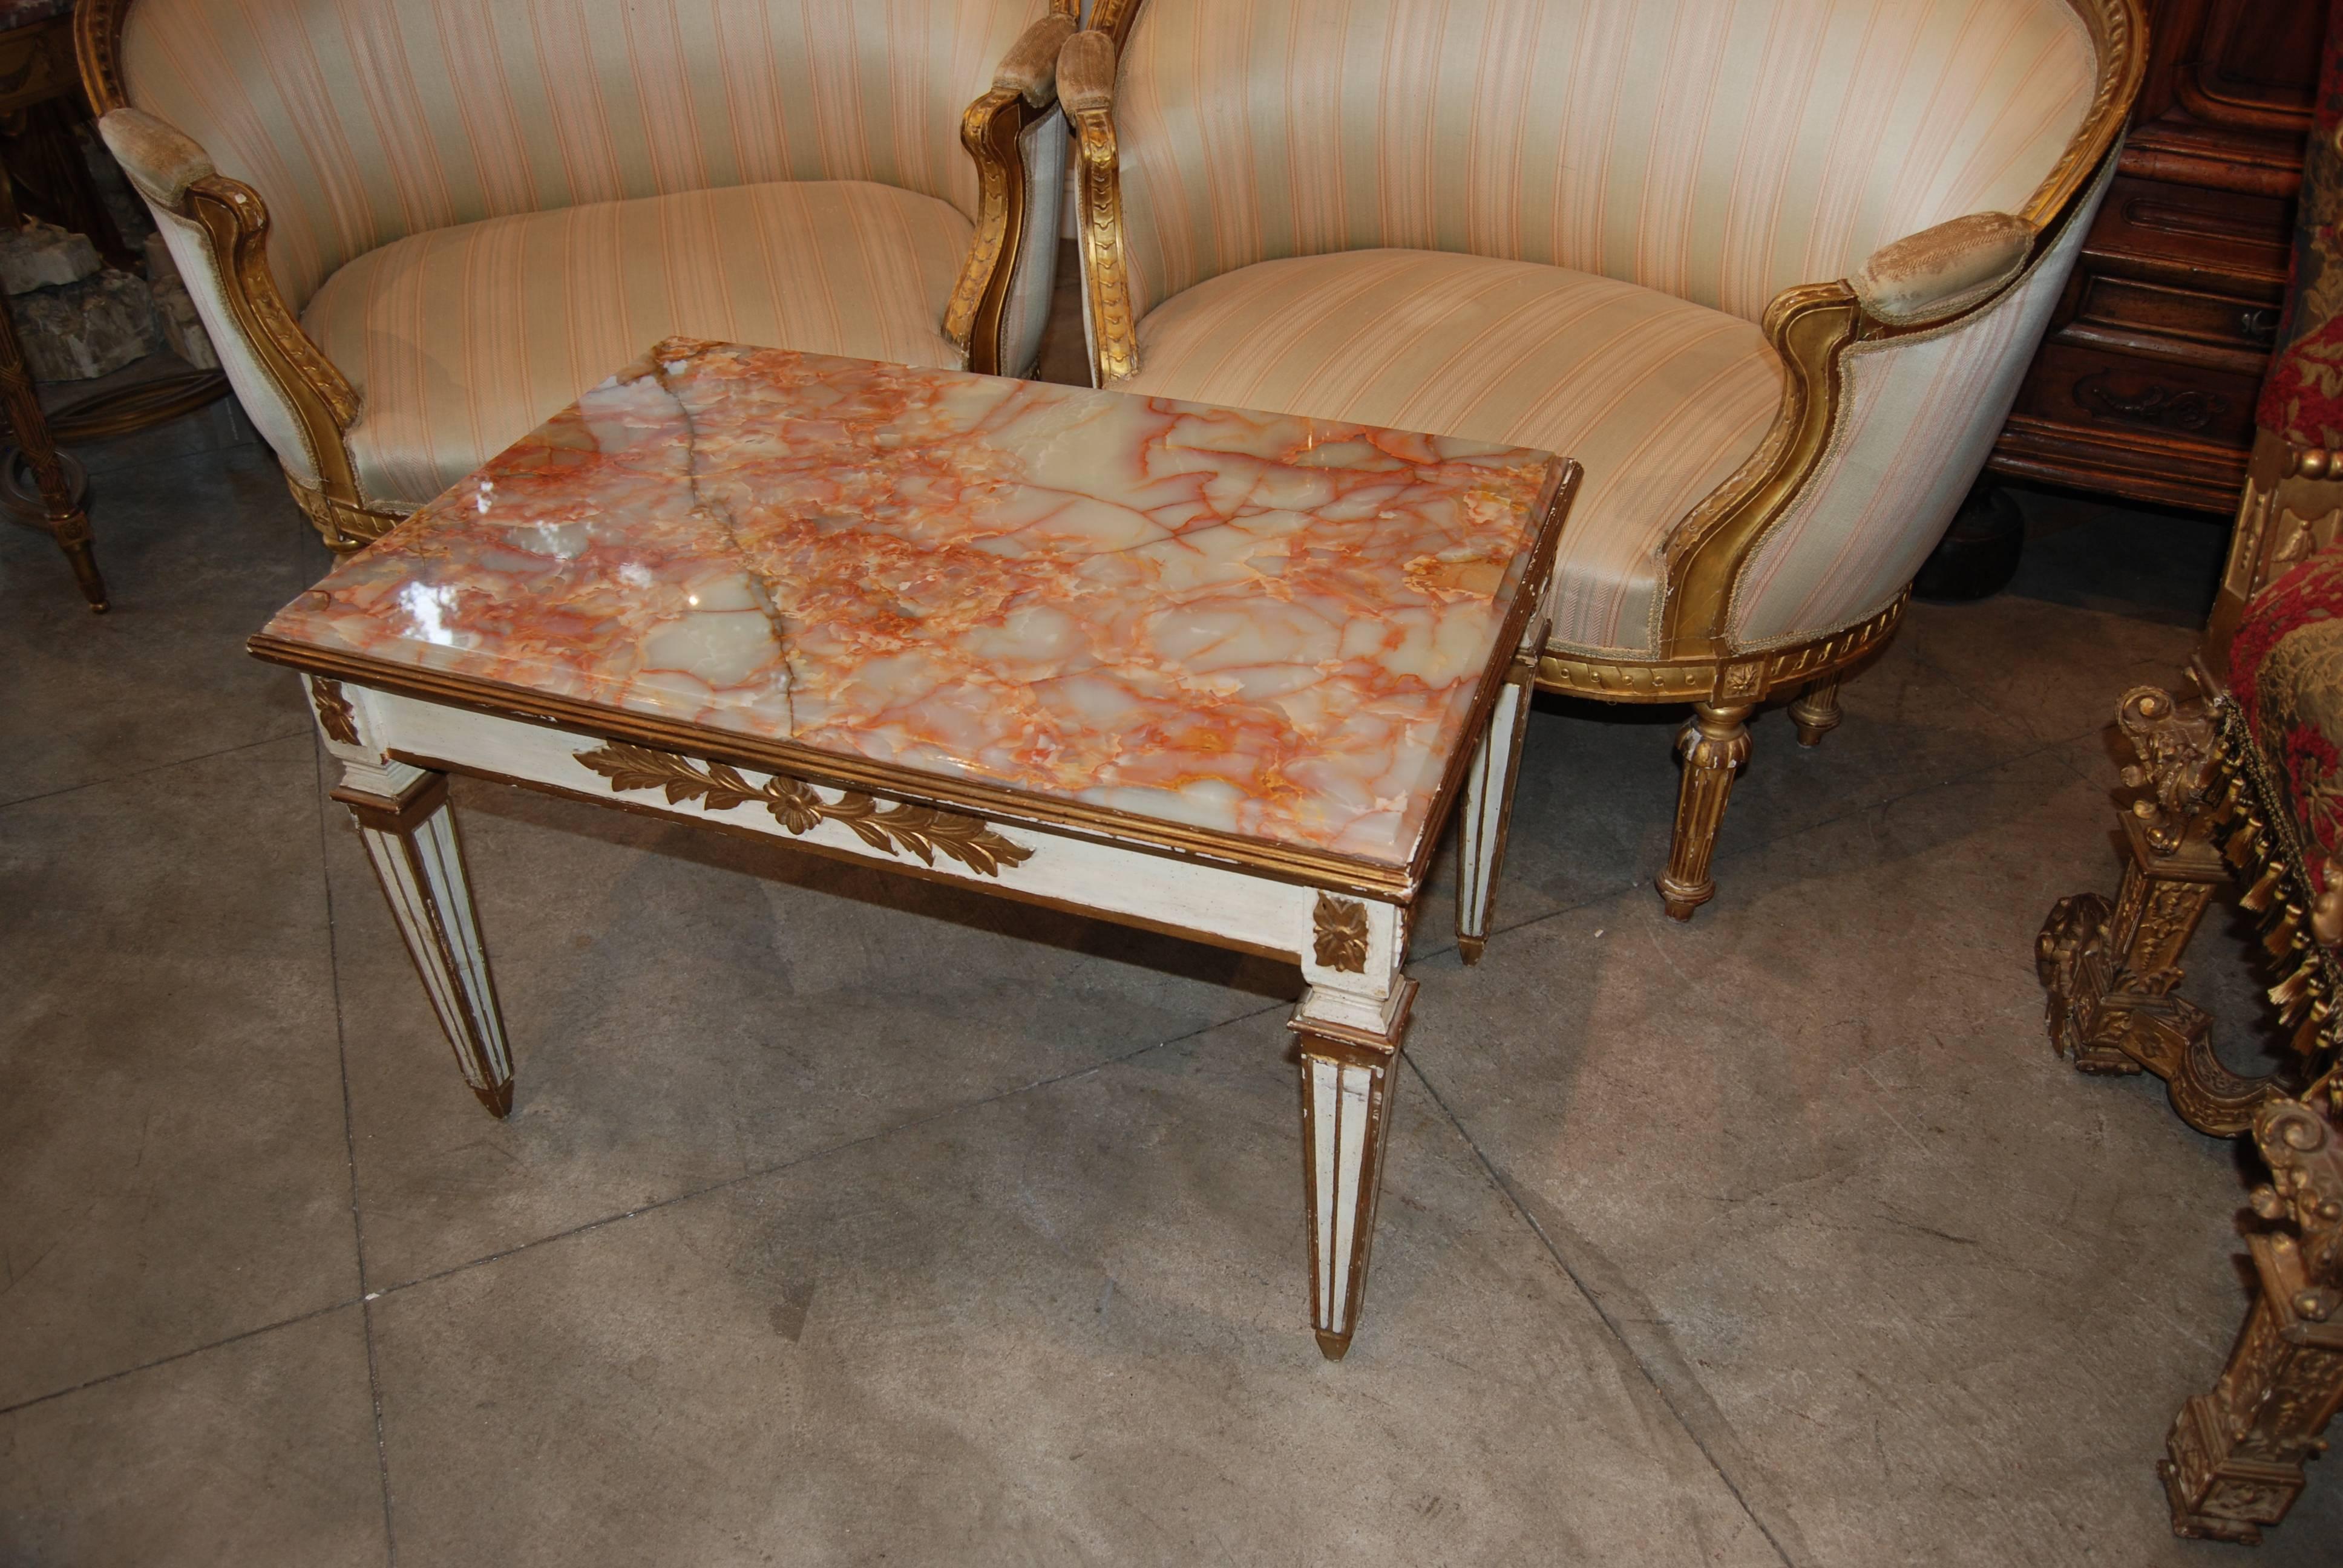 Beautifully carved and painted low table with original onyx top.